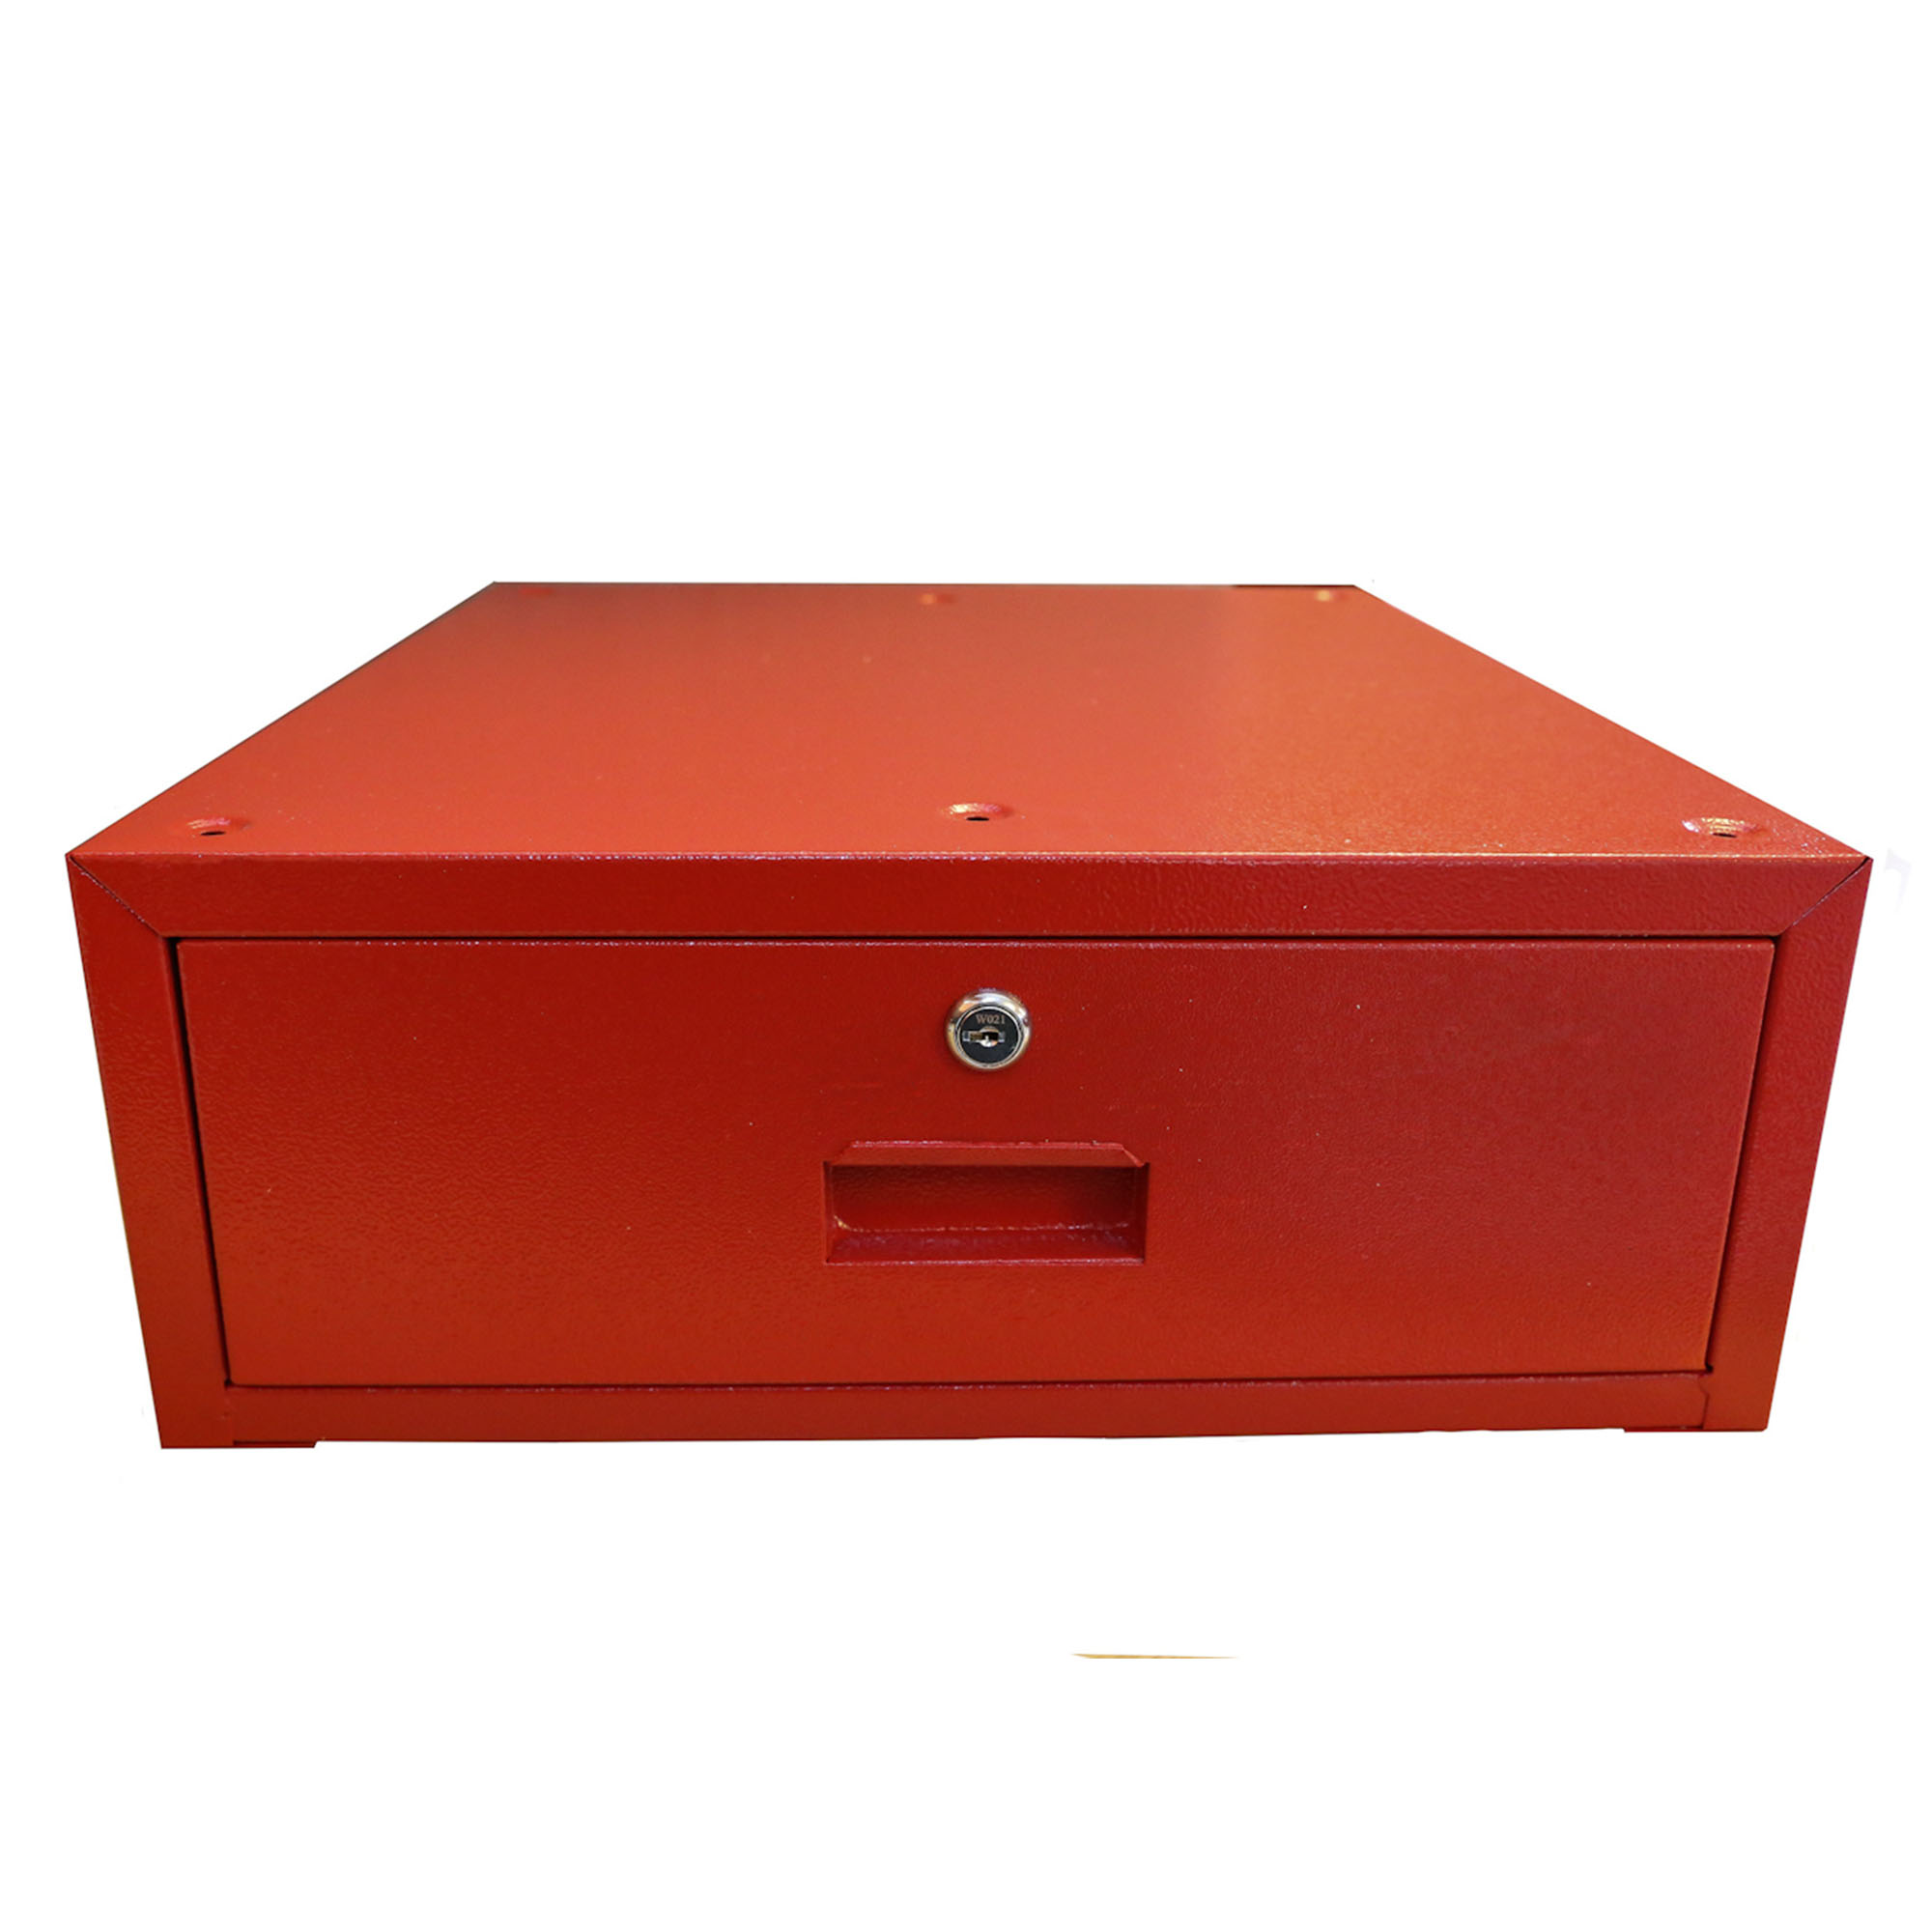 Shop Equipment, Transmission Tables, Drawer (Lock and Key Sold Separately), 2101 Drawer, American Hawk Industrial, Dee-Blast